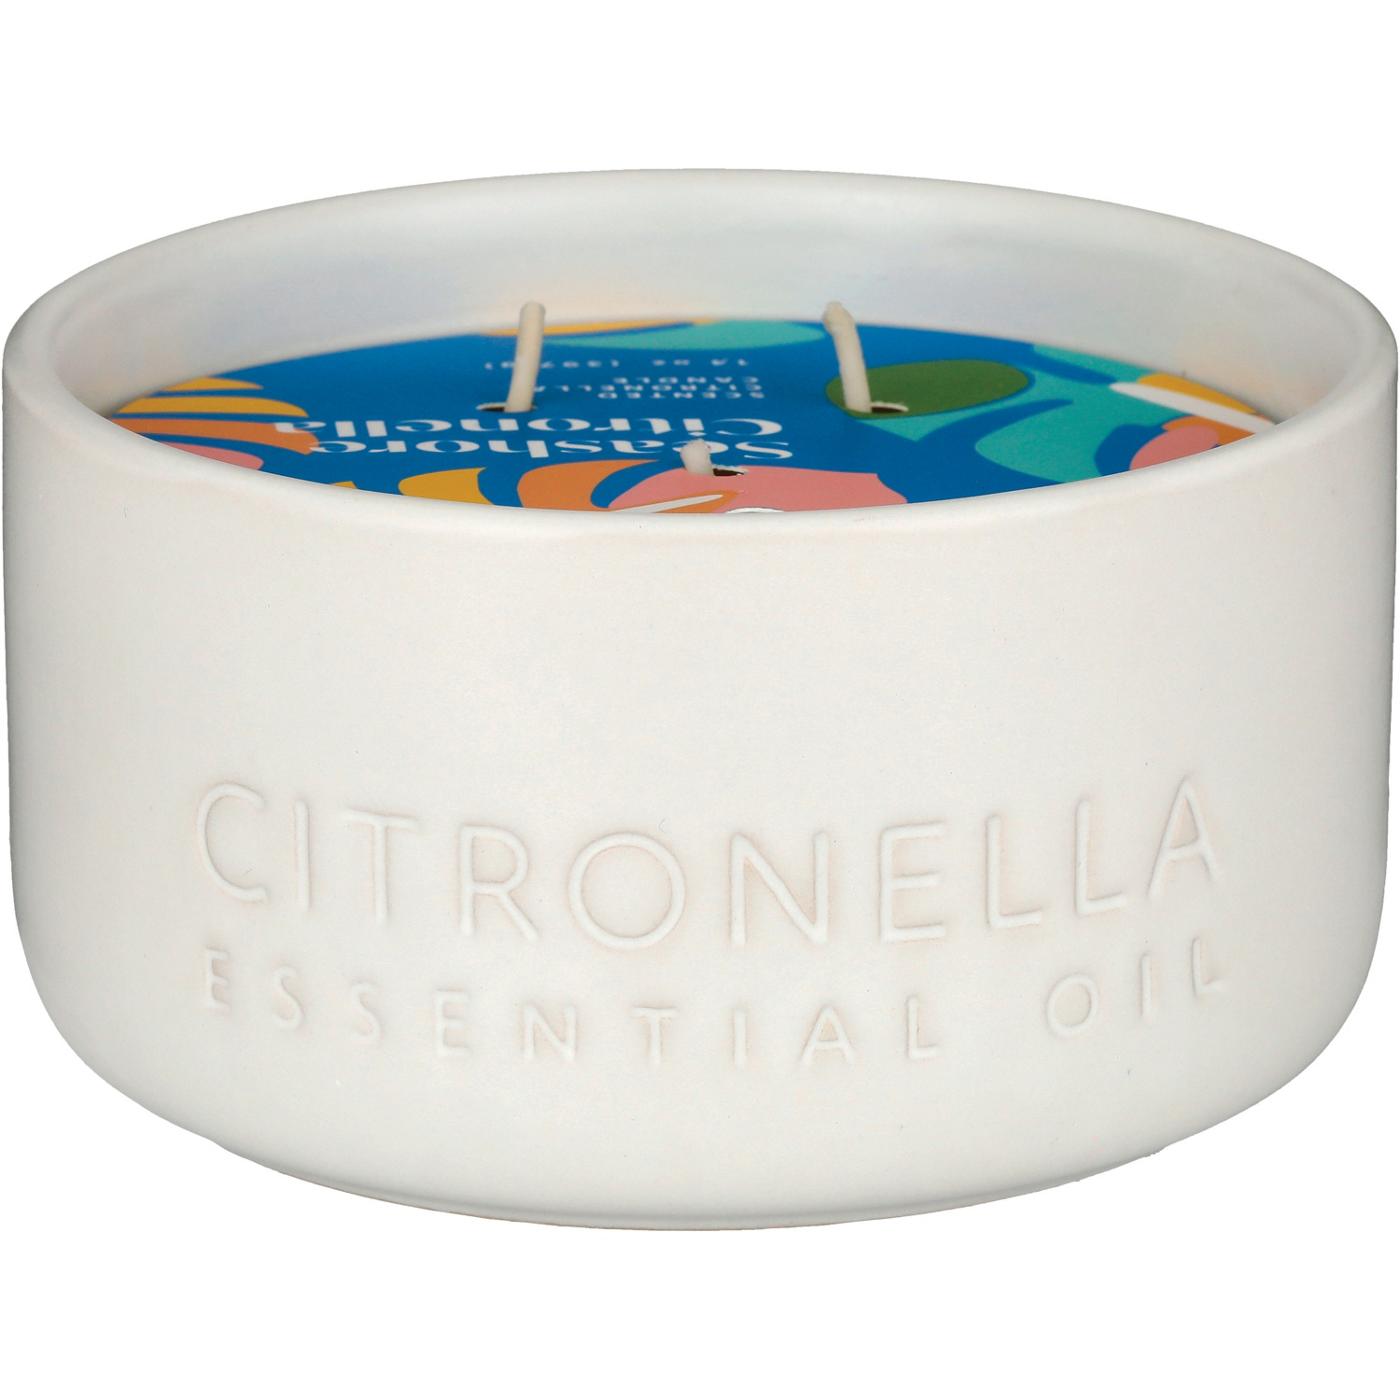 Destination Holiday Citronella Essential Oil Candle - Ivory; image 1 of 2